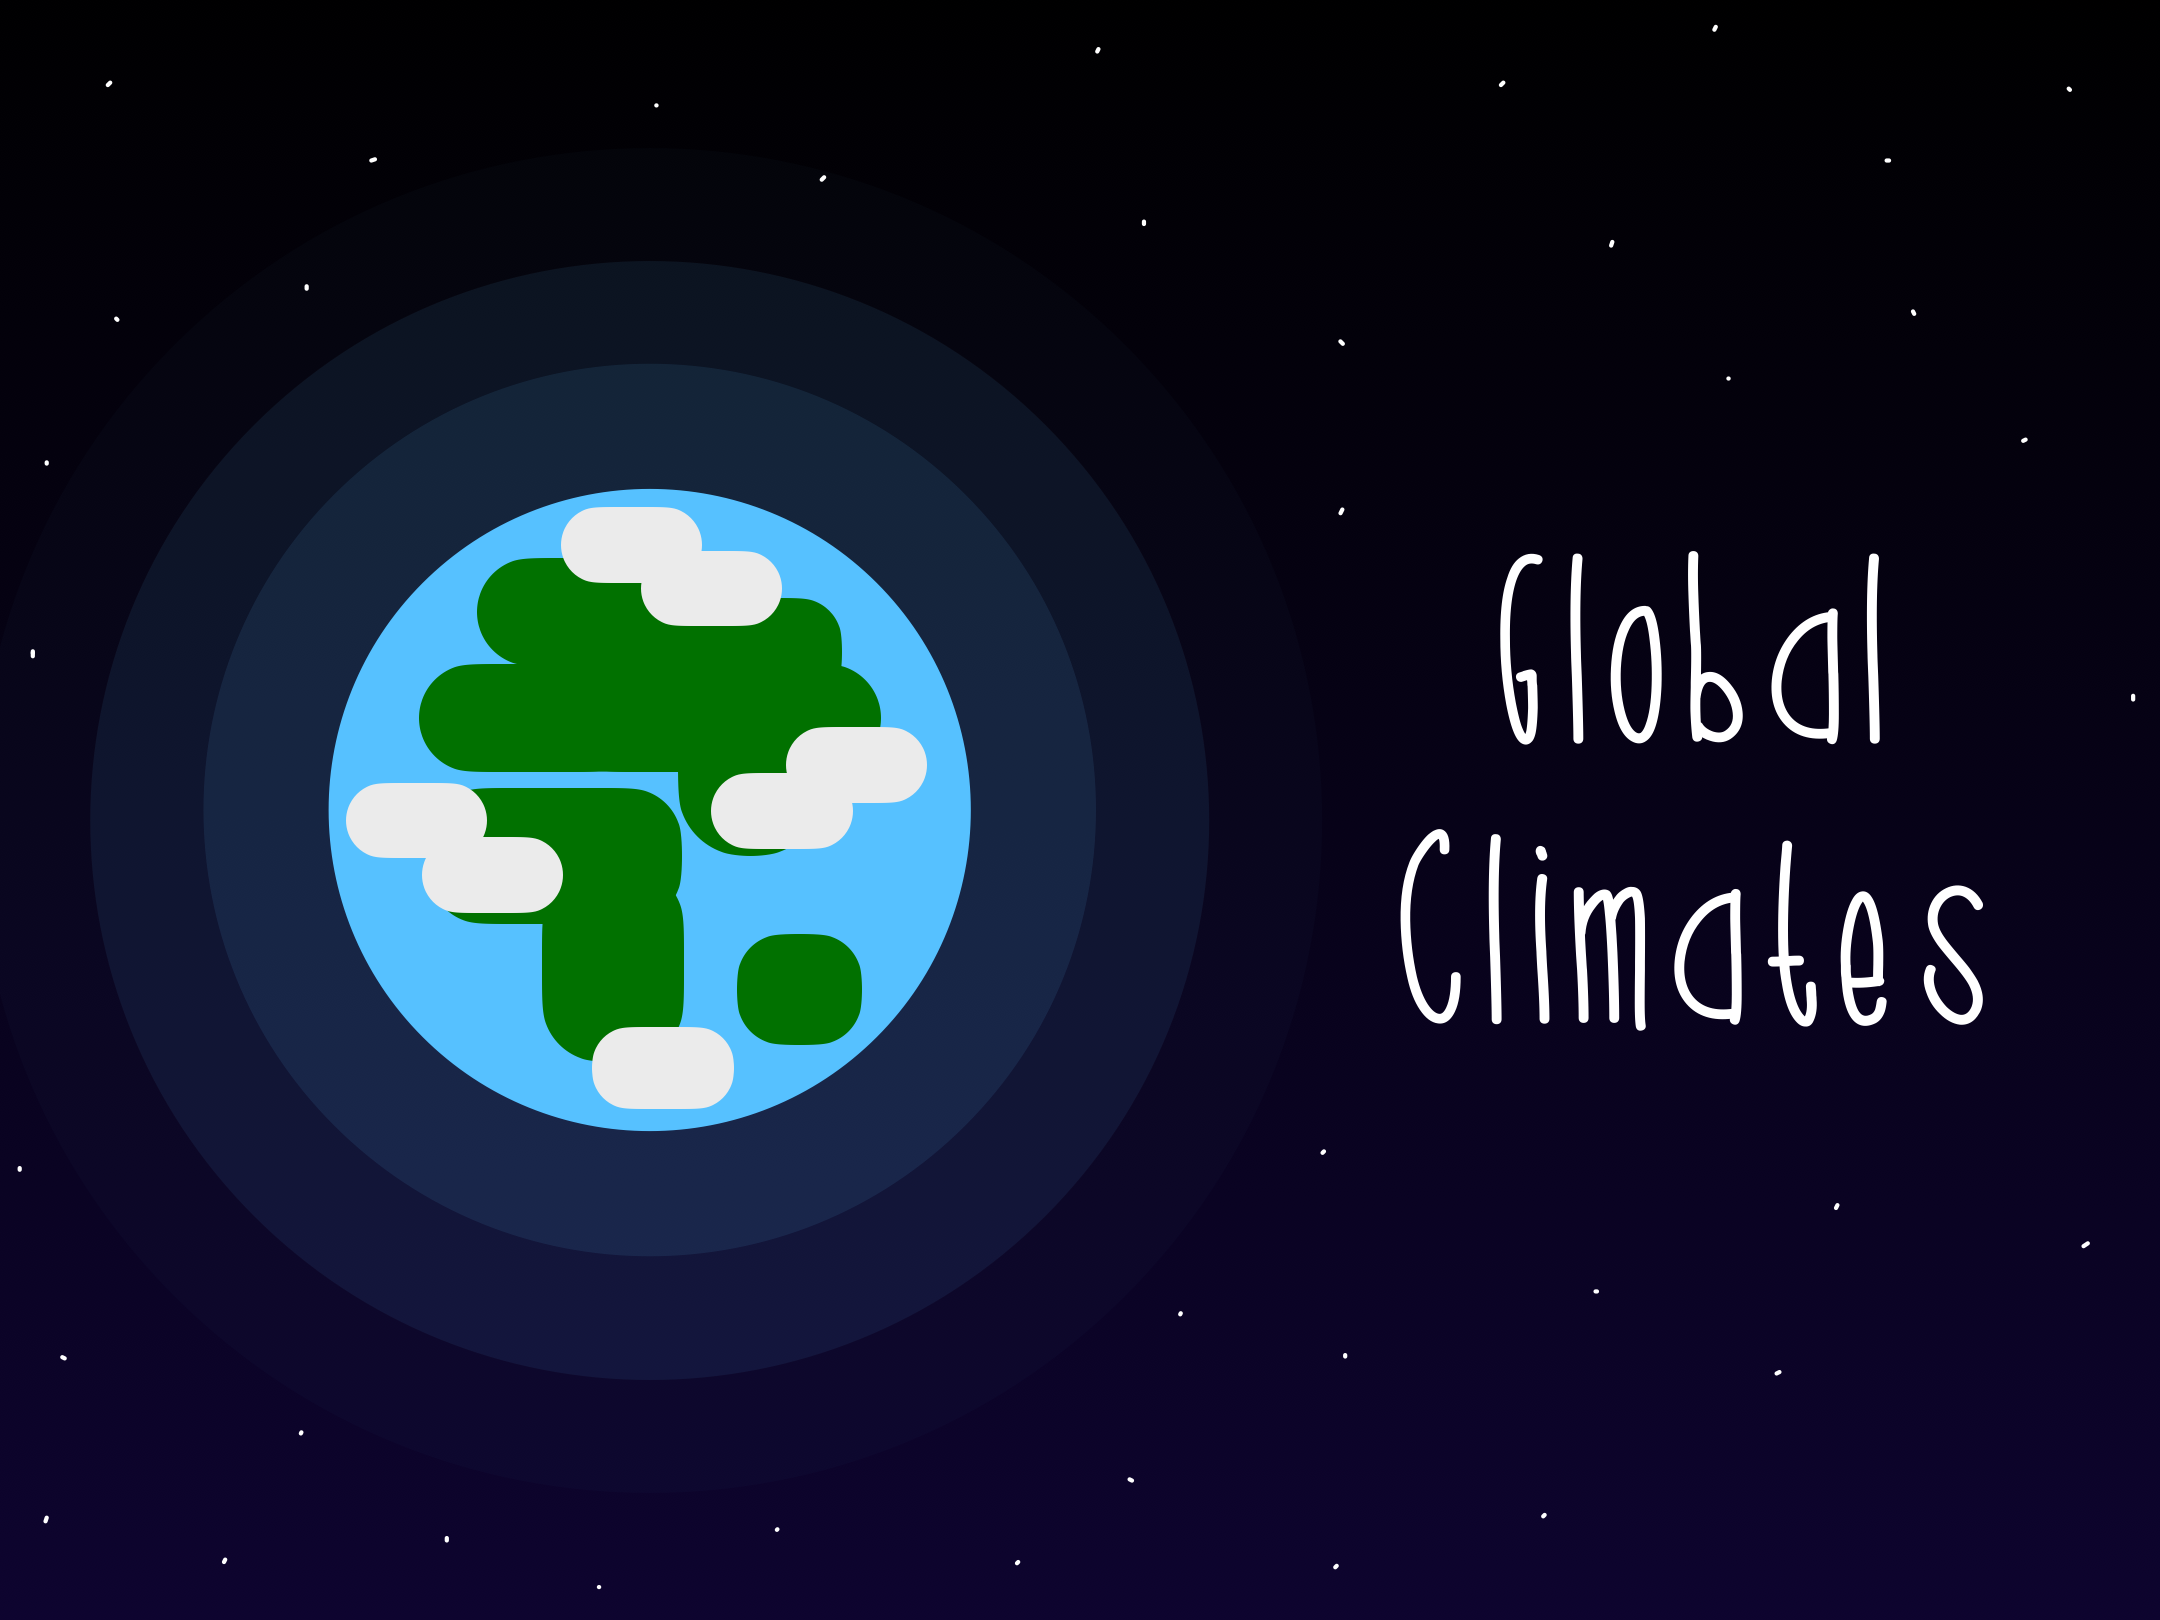 Stylised cartoon-like Earth, left of centre, against a dark blue space background. Text on right reads ‘Global Climates’.